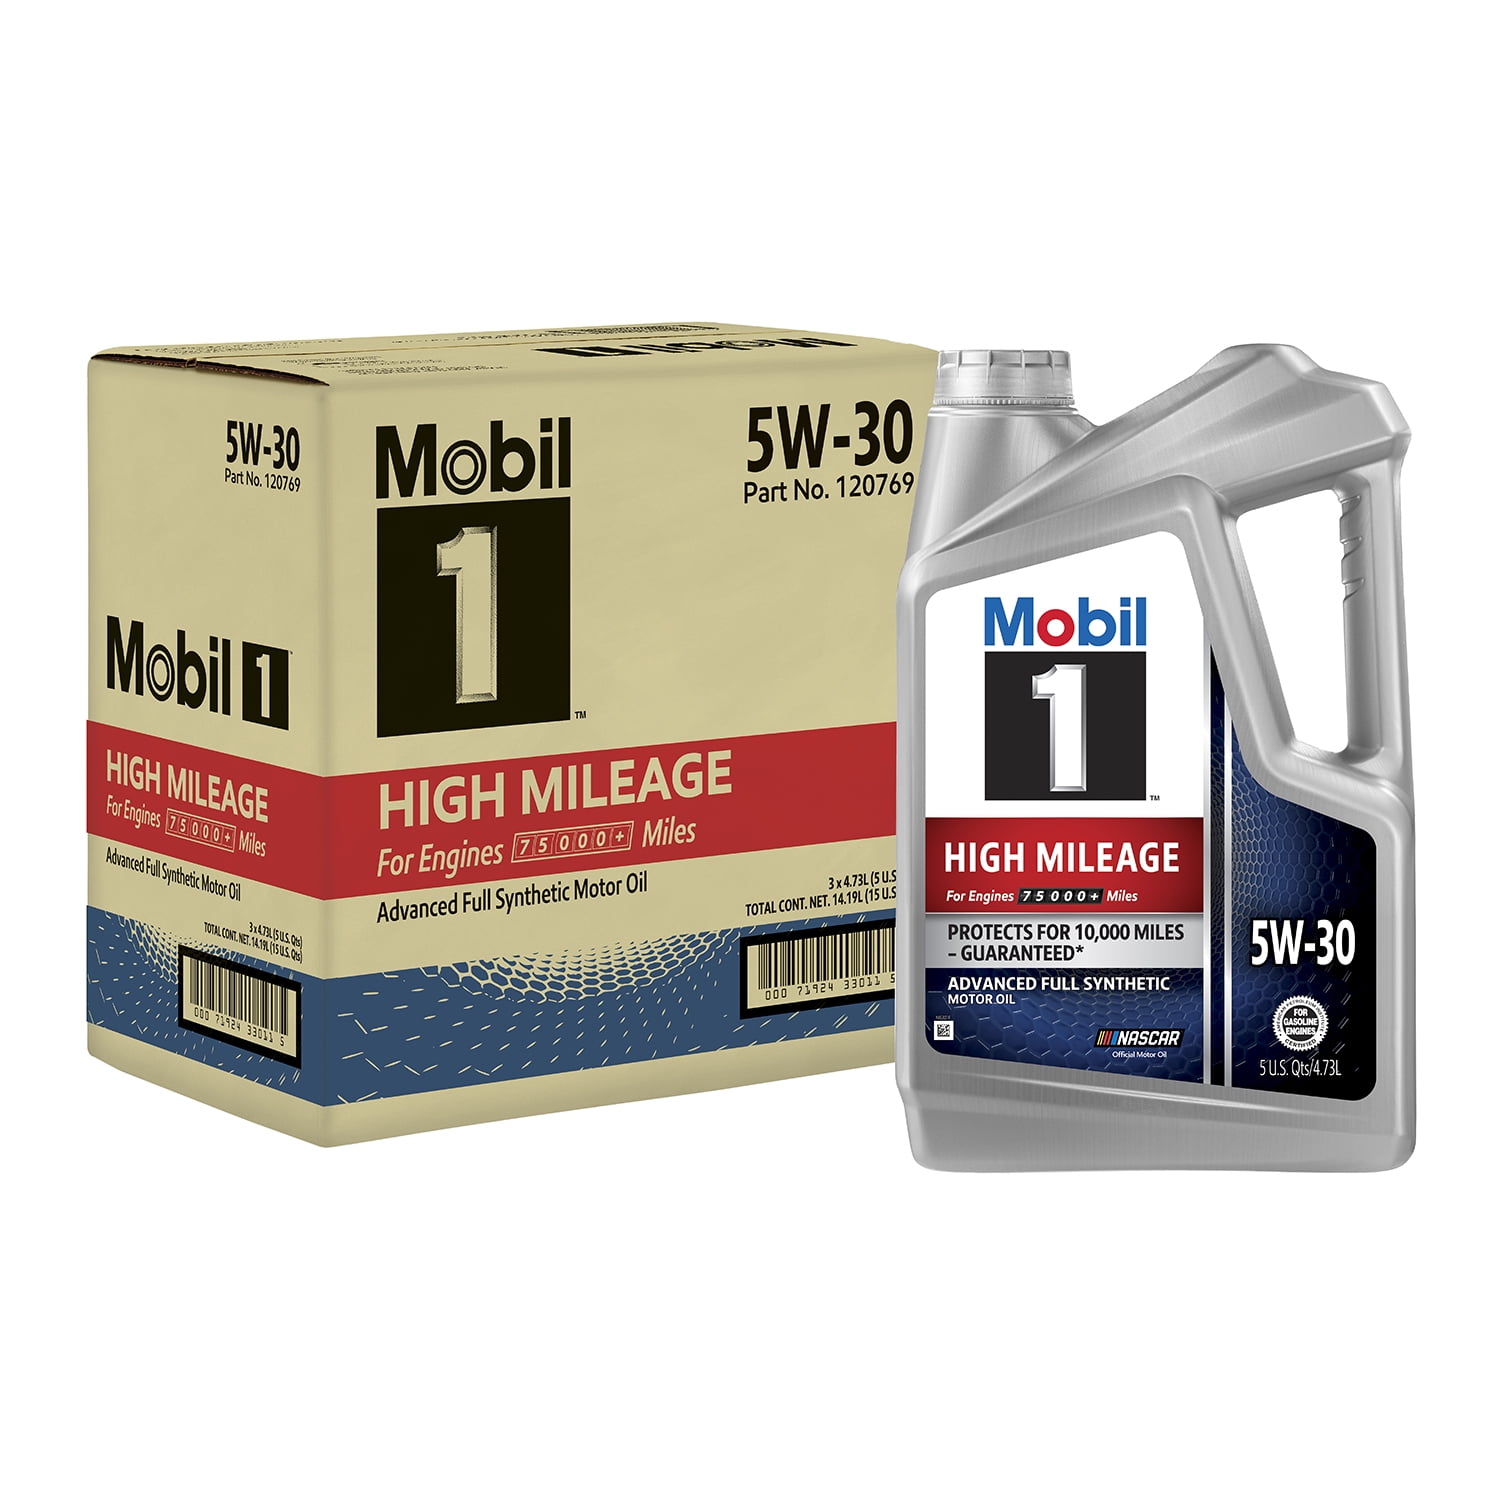 Mobil 1 High Mileage Full Synthetic Motor Oil 5W-30, 5 qt (3 Pack) - 1